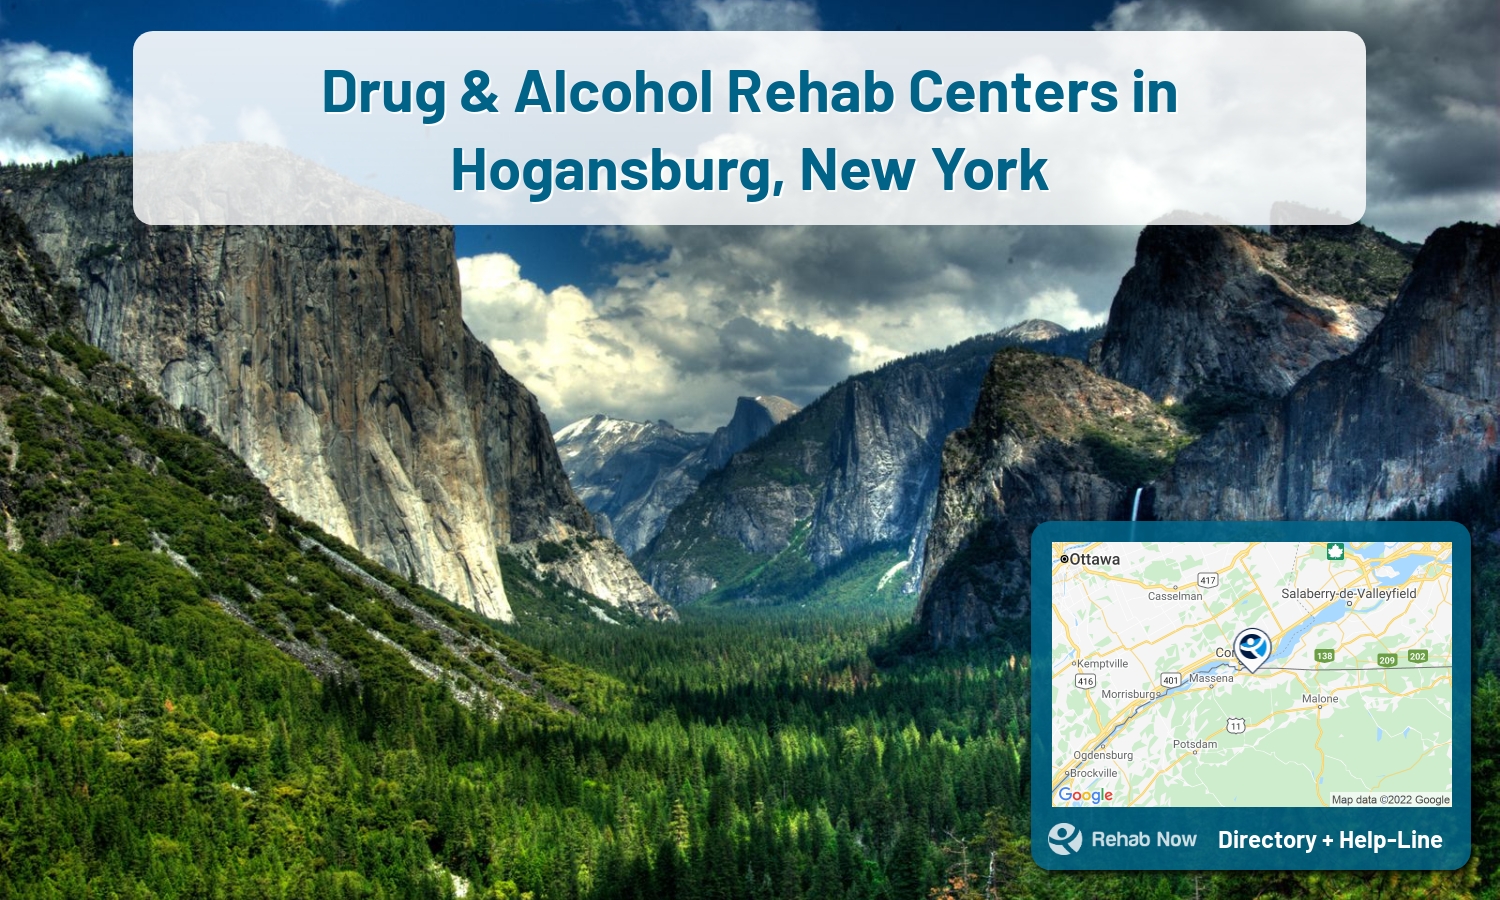 Hogansburg, NY Treatment Centers. Find drug rehab in Hogansburg, New York, or detox and treatment programs. Get the right help now!